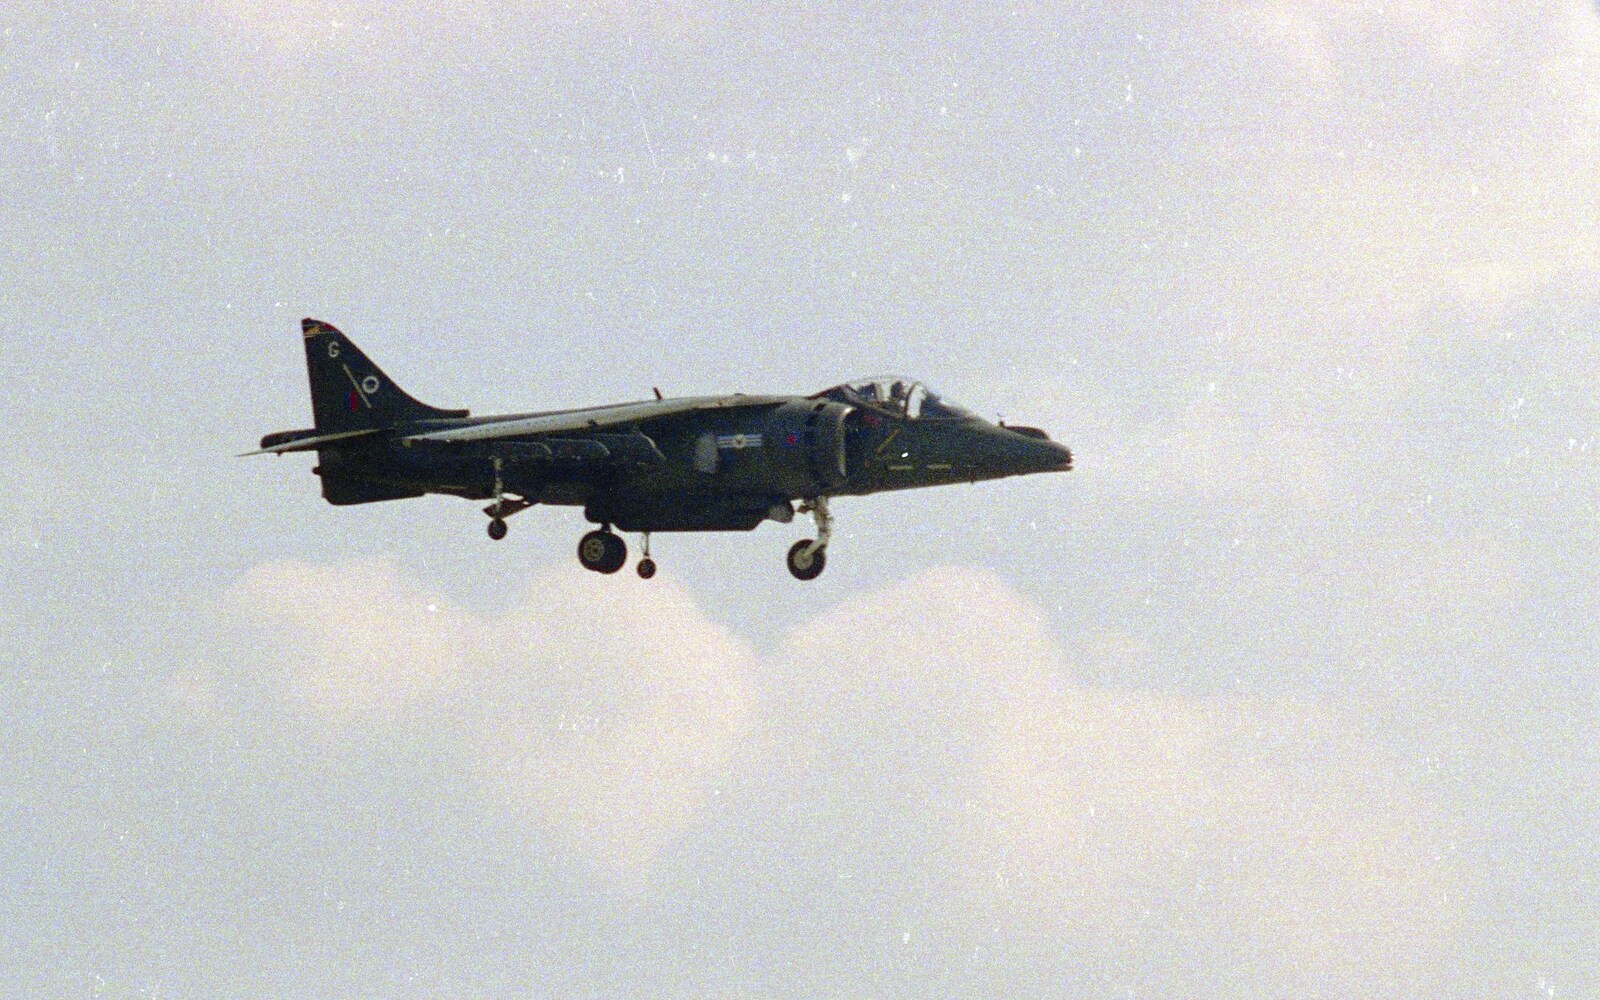 A Harrier does manoeuvers from The Mildenhall Air Fete, Mildenhall, Suffolk - 29th May 1994